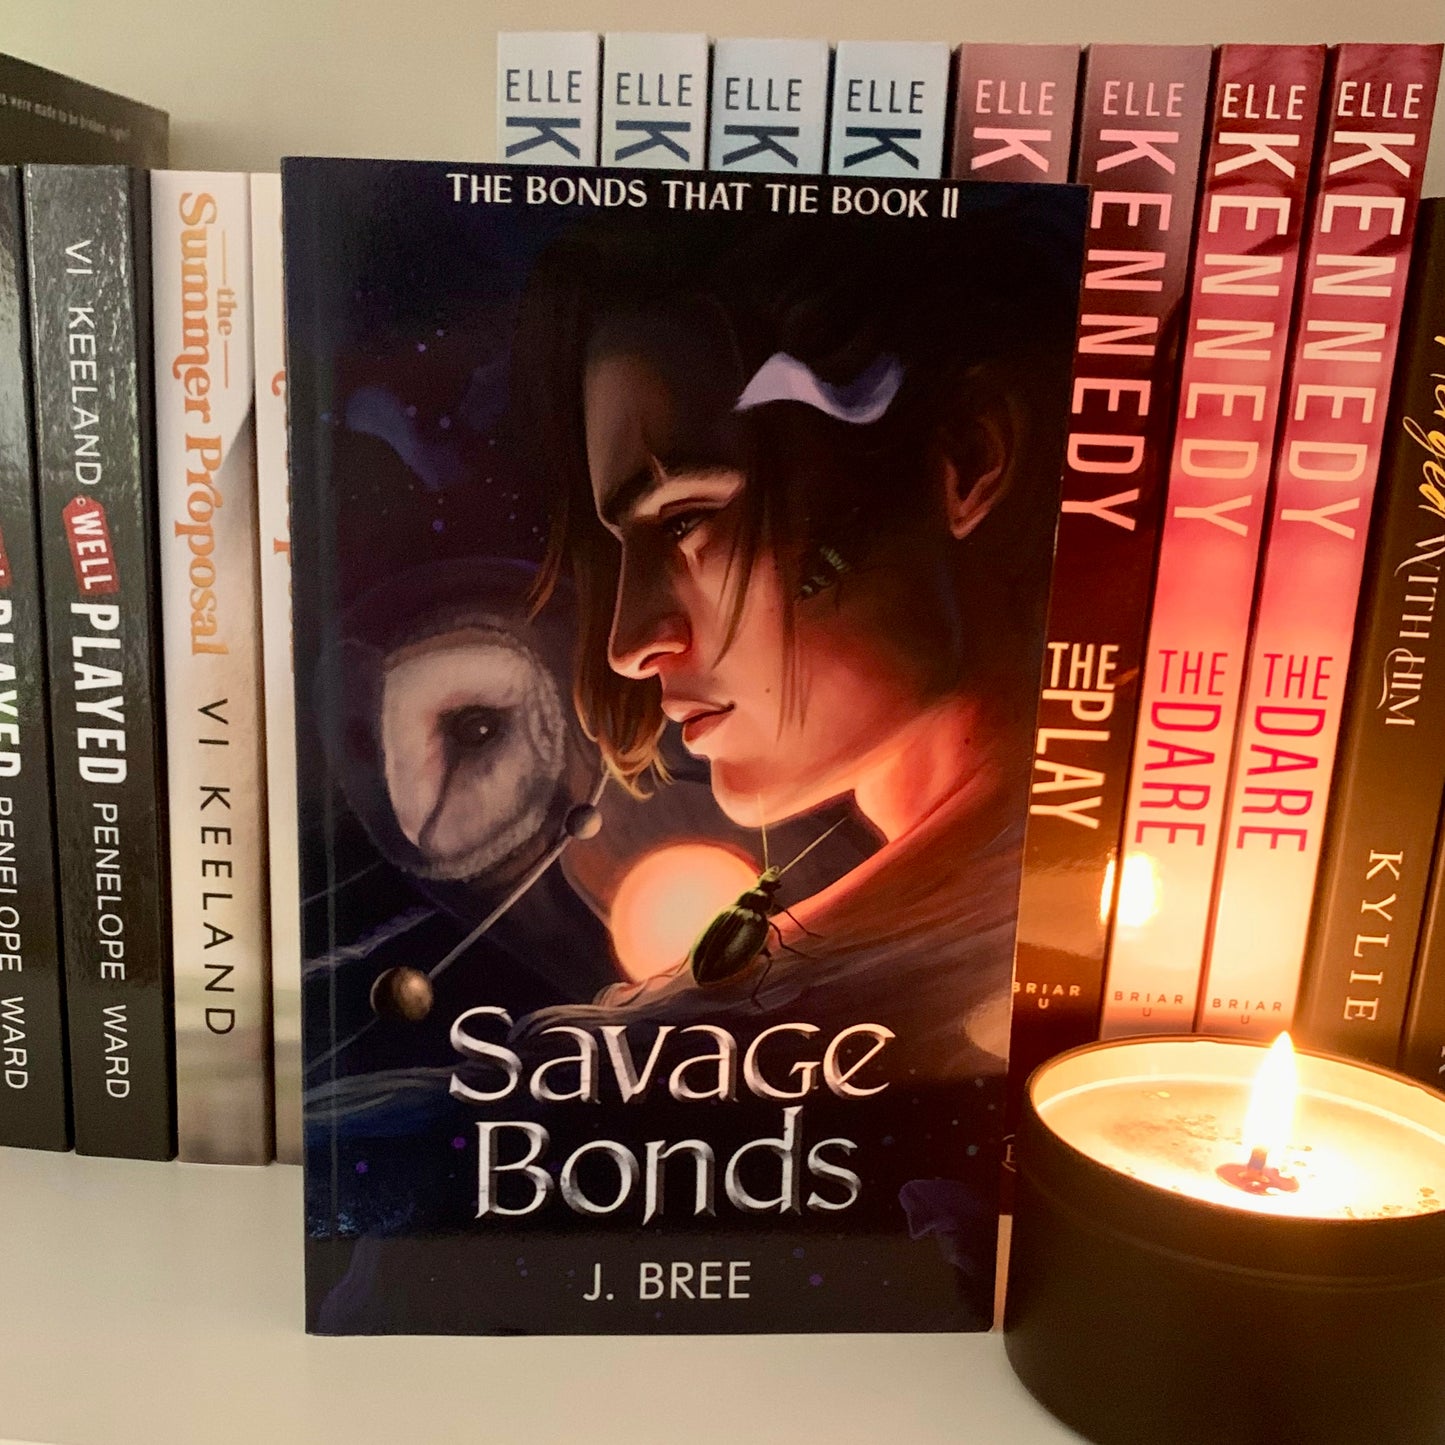 The Bonds that Tie Series by J Bree